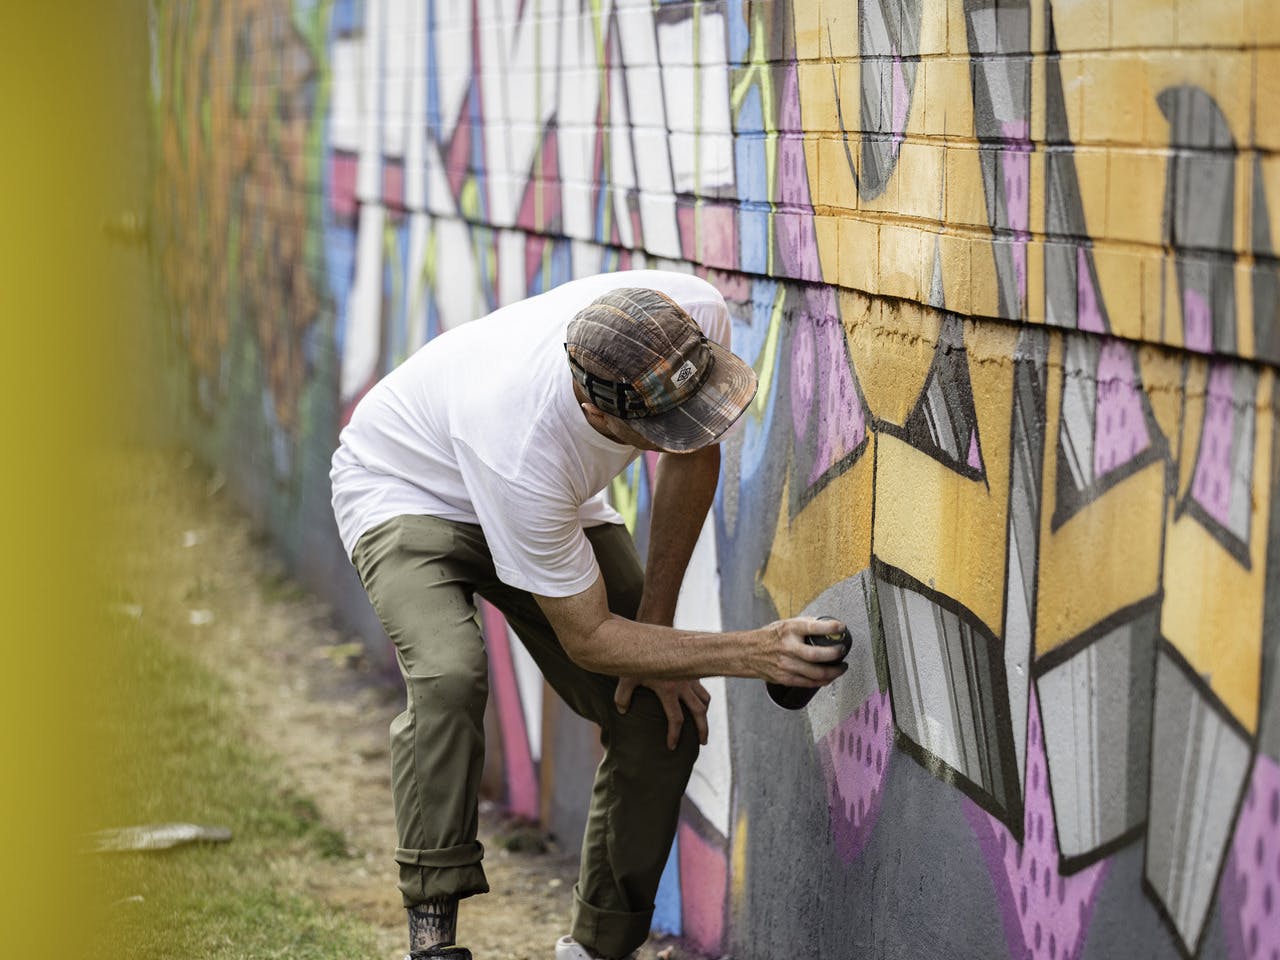 A man stands with a can of spray paint in front of a painted wall he's working on.